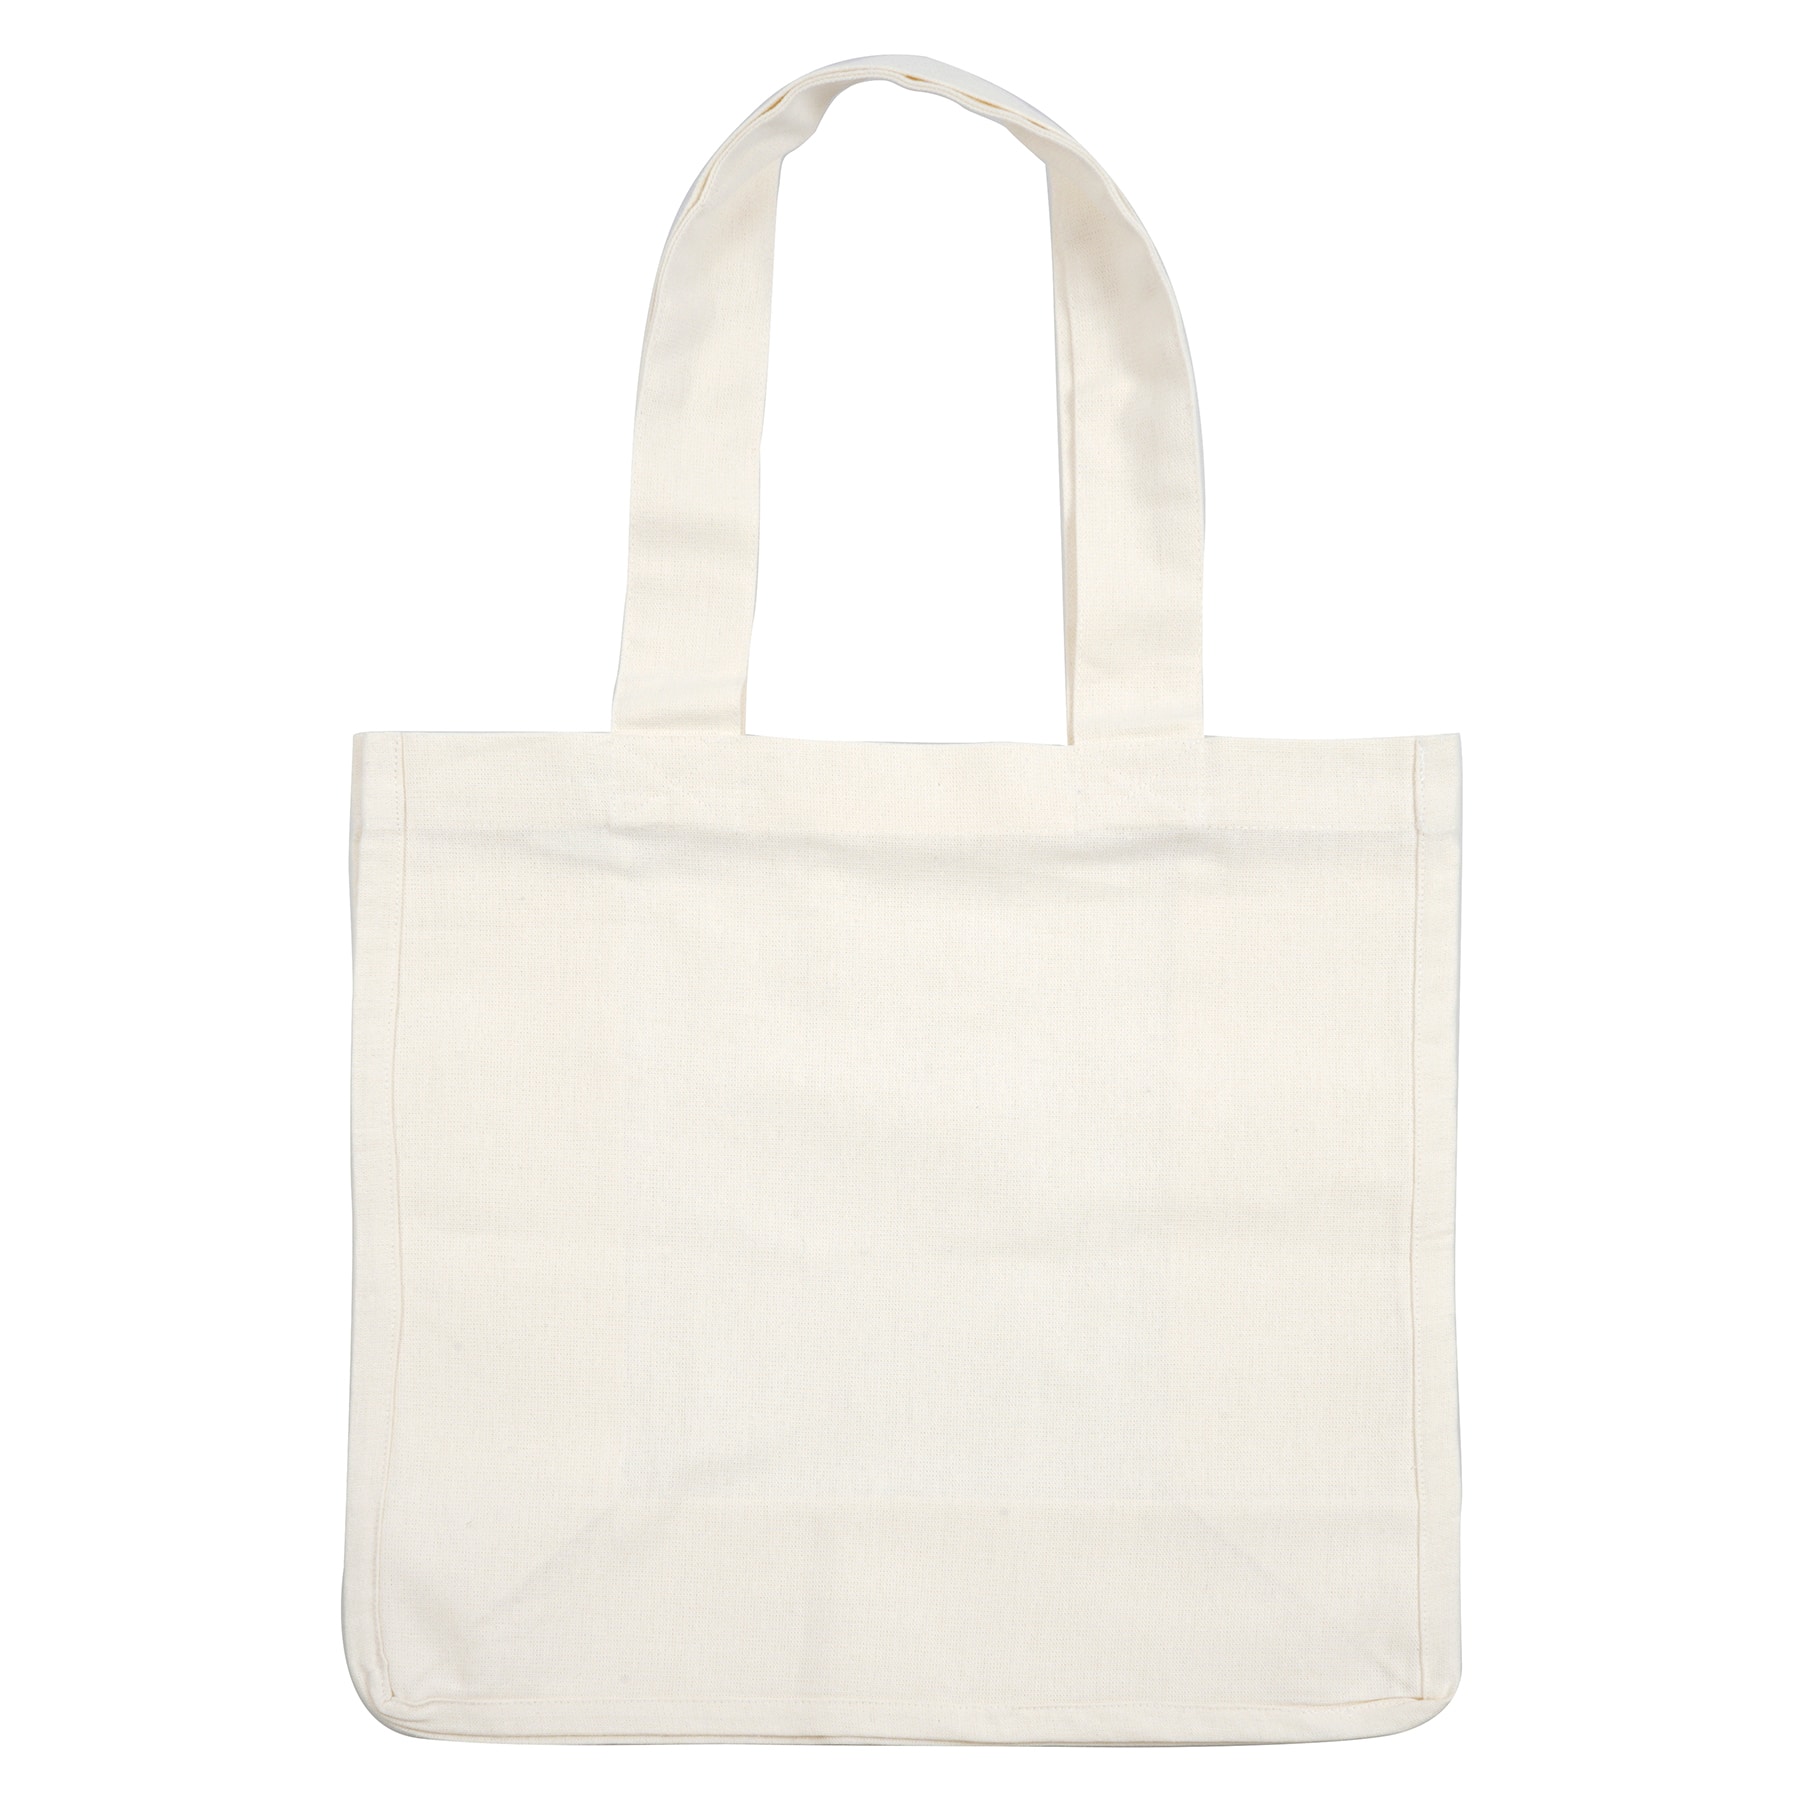 12 Pack: Durable Canvas Tote by Make Market, Size: 13 x 14 x 7, White